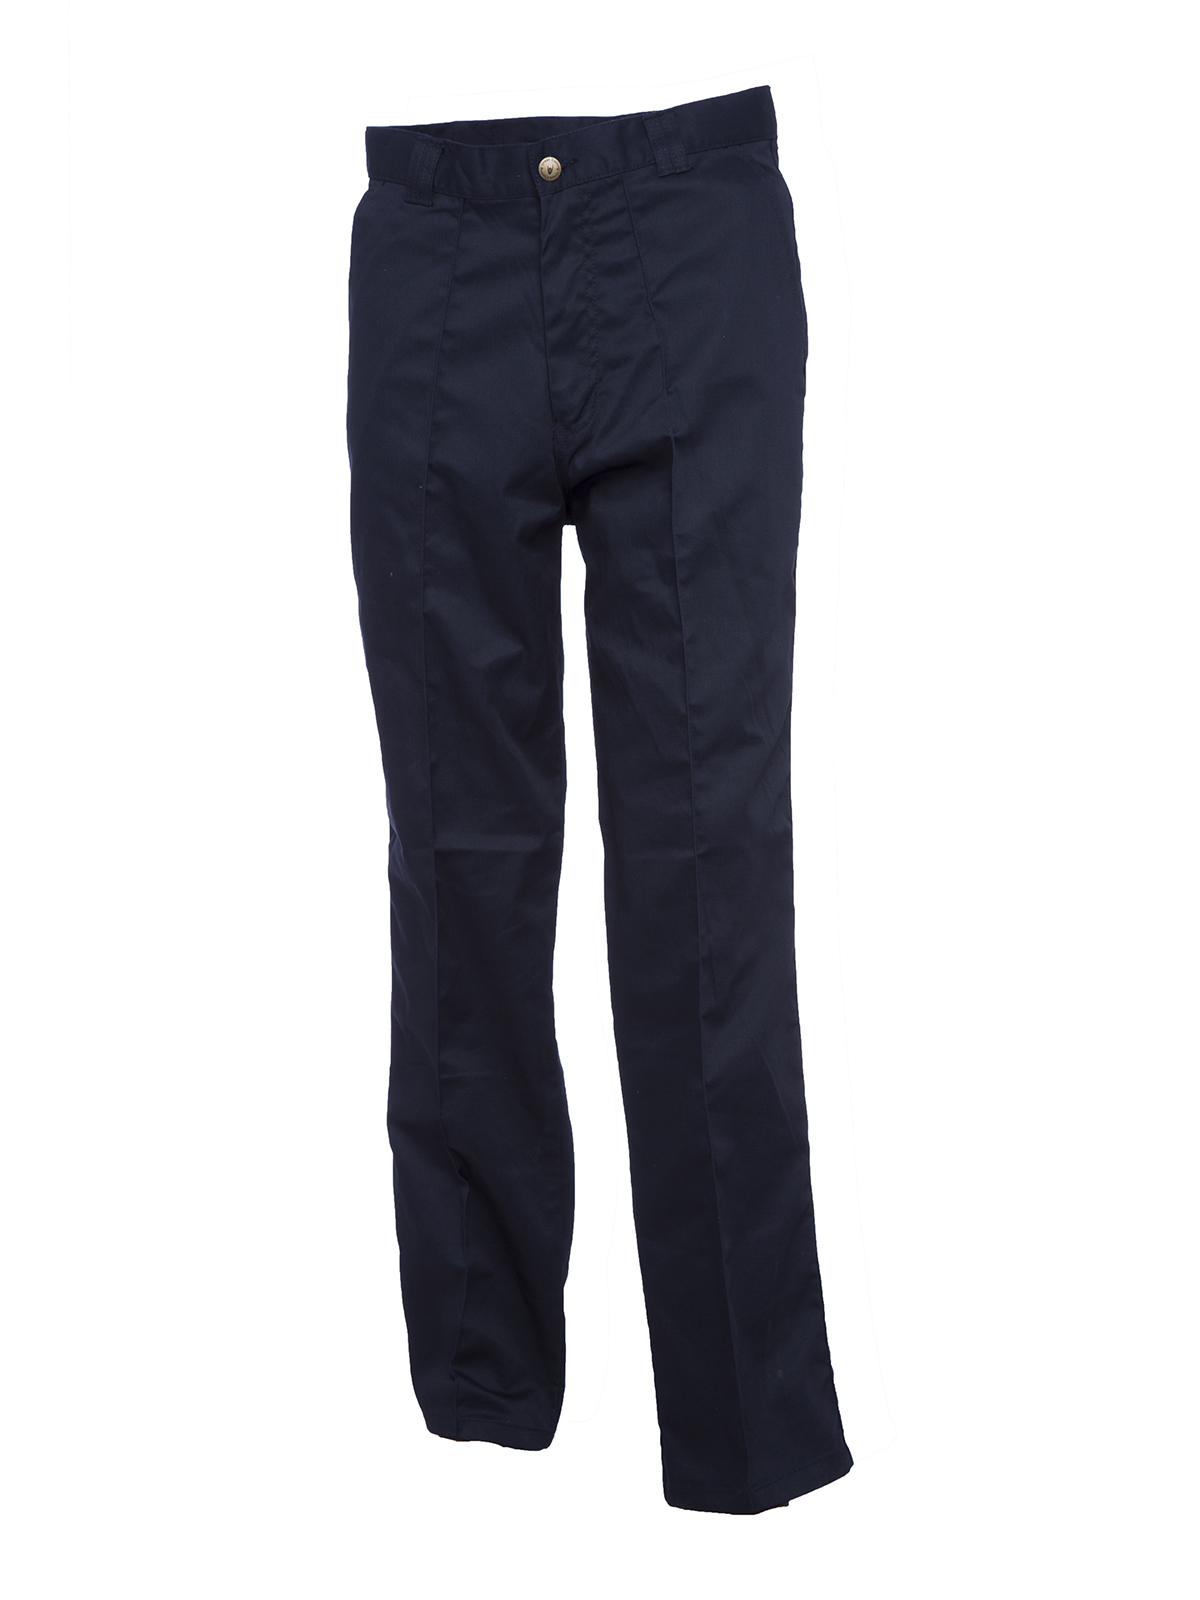 Workwear Trousers, Navy Blue - 40R